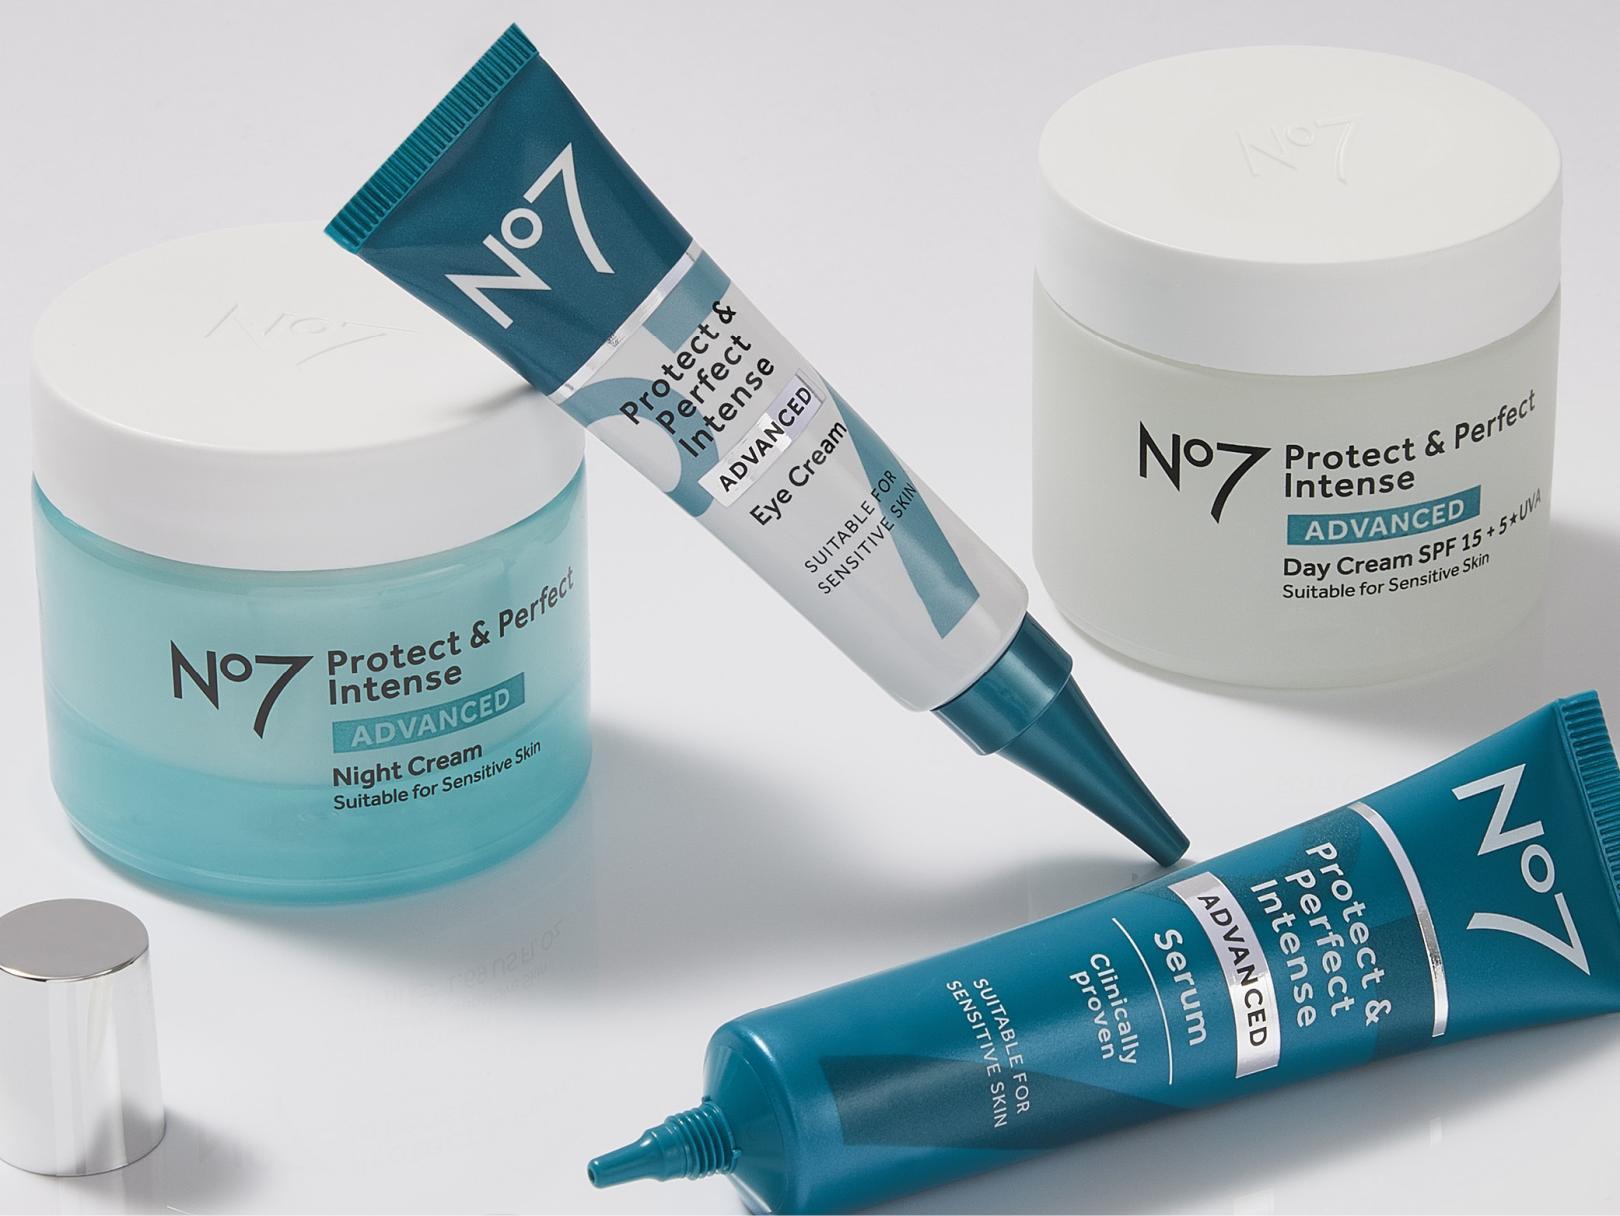 No7 products